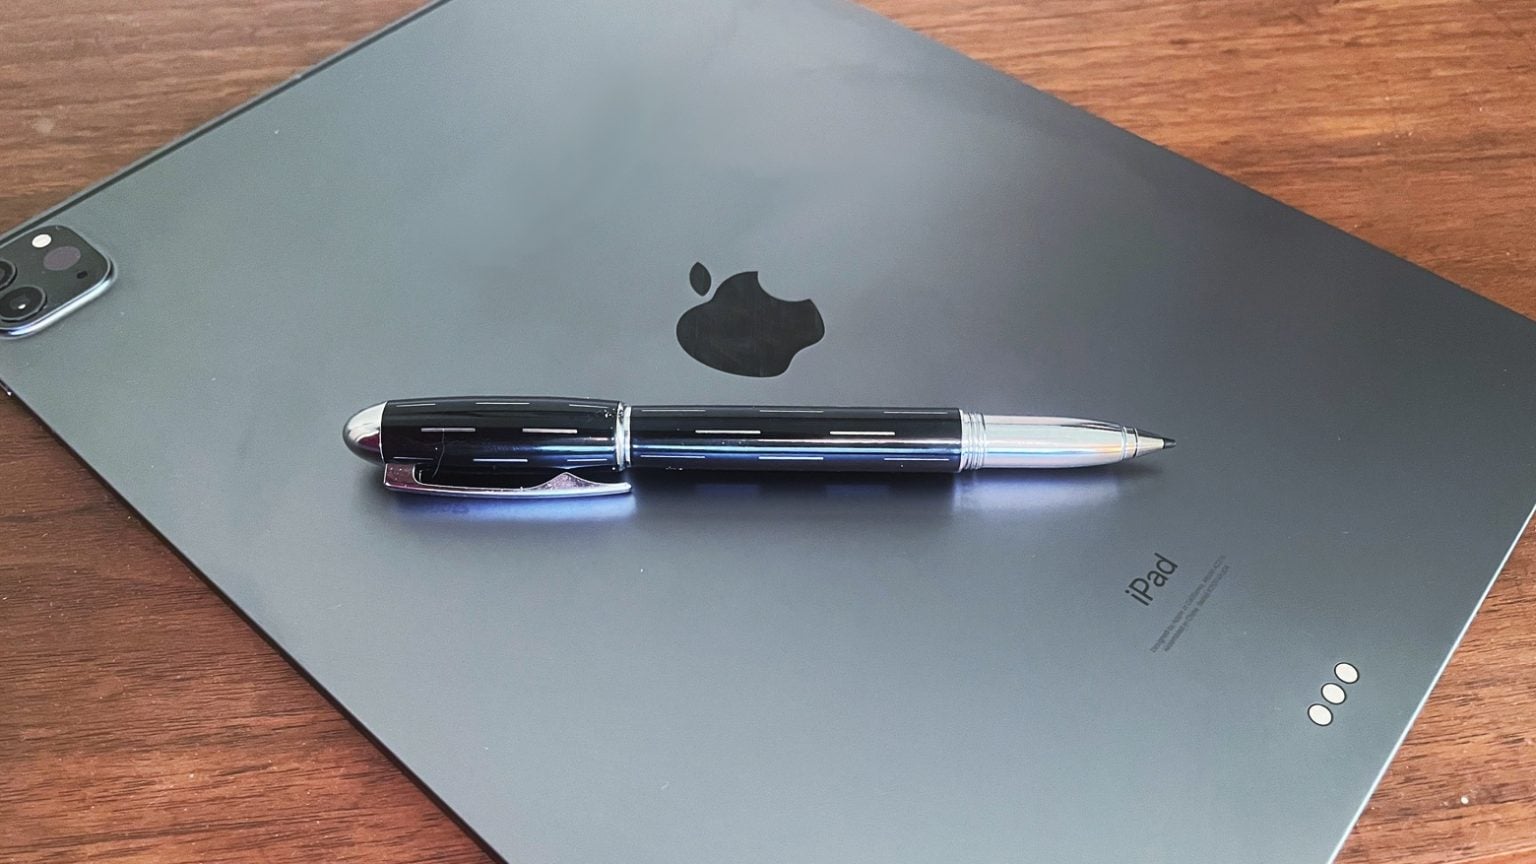 Stand out in the boardroom with Adonit Prime iPhone/iPad stylus [Review]